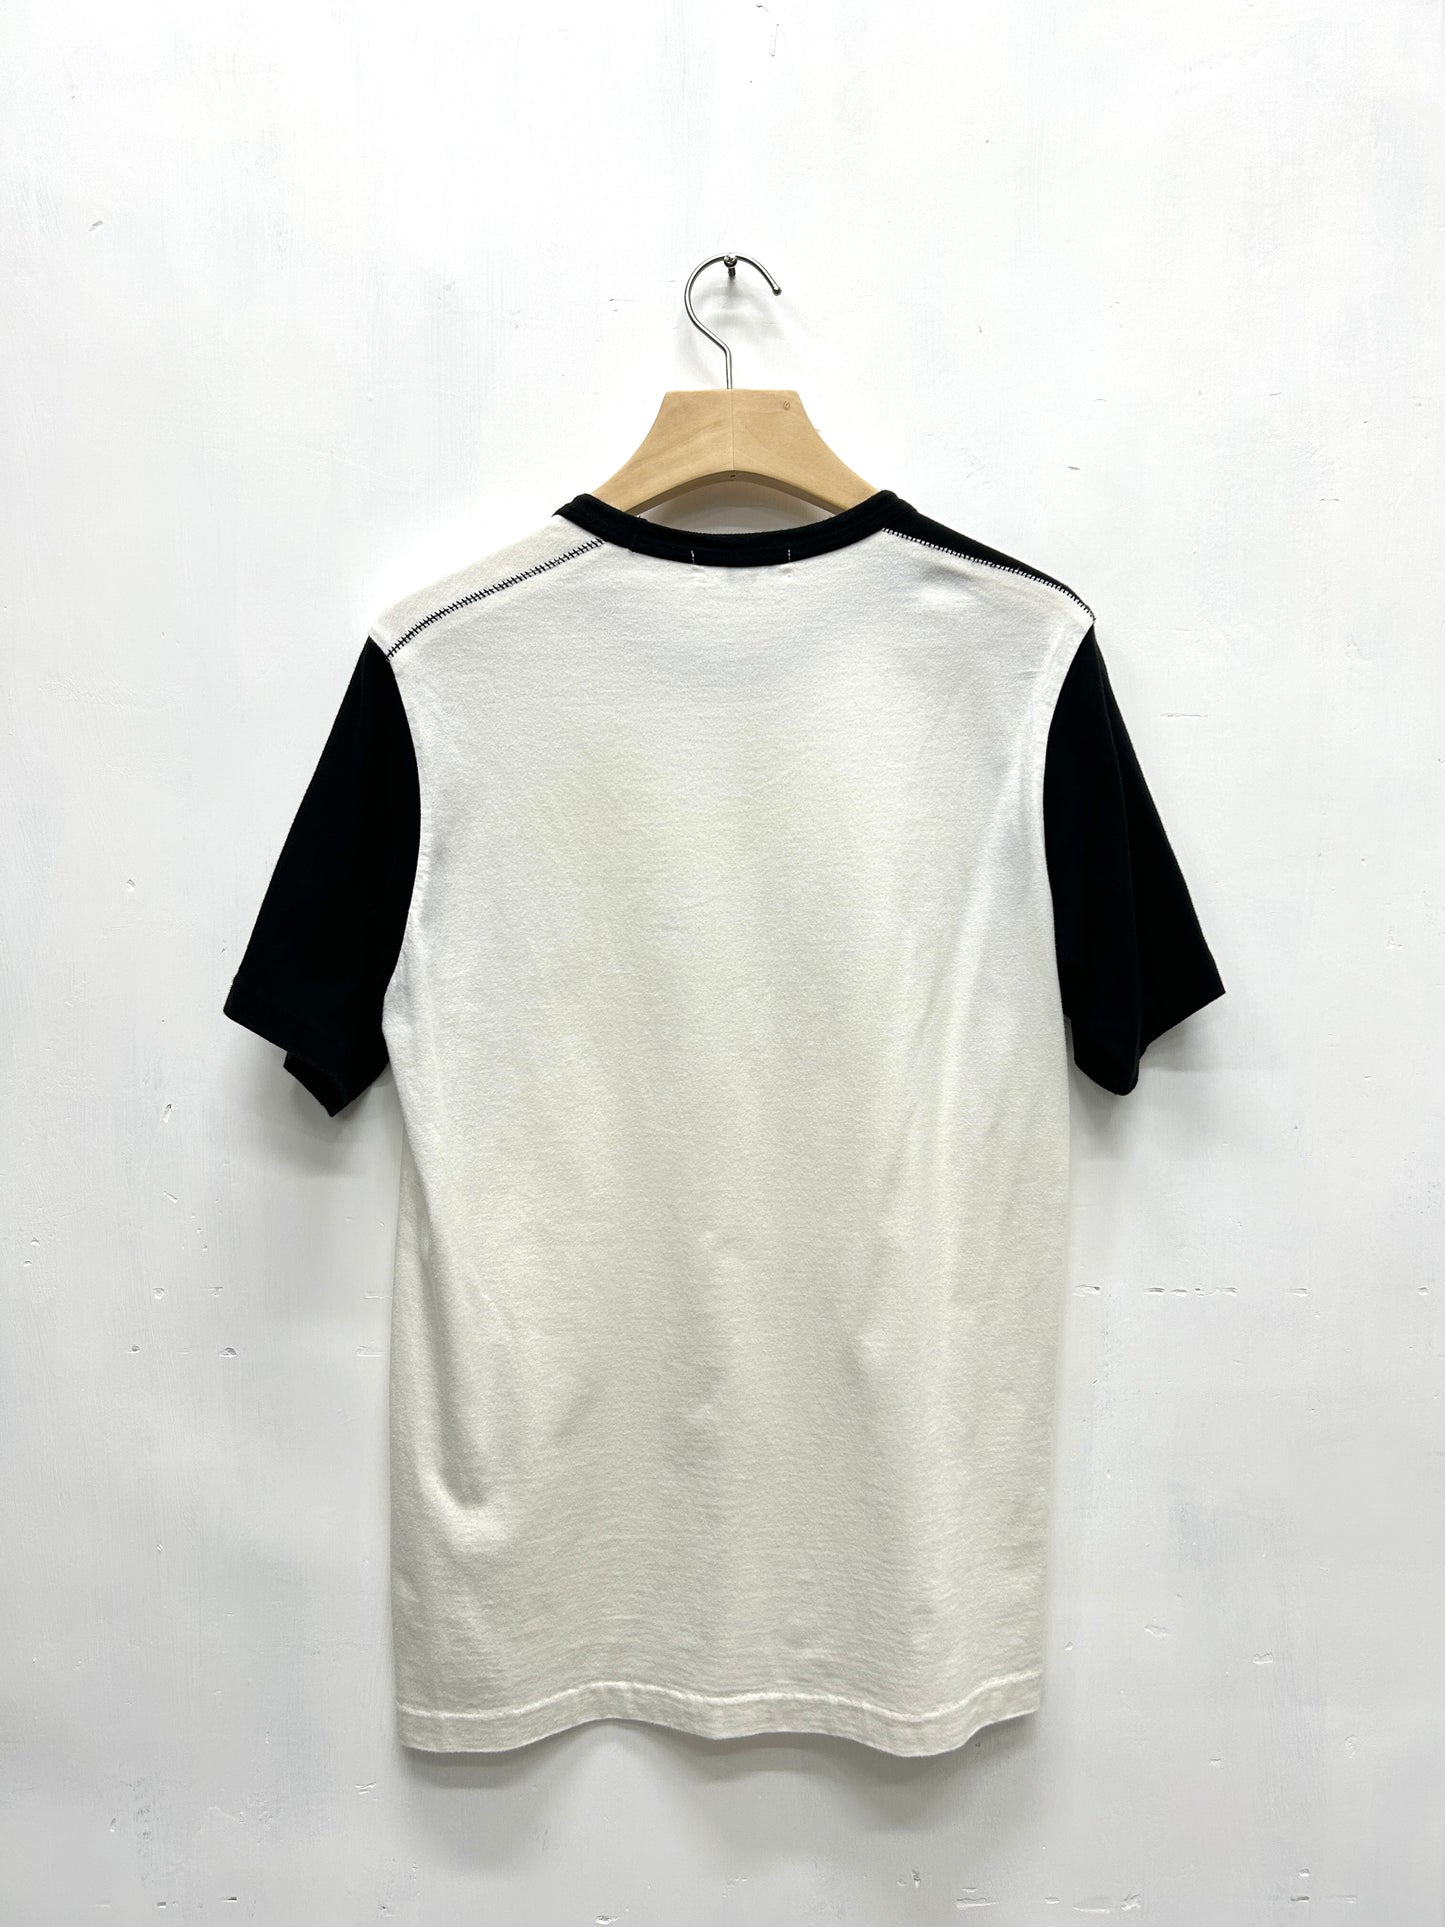 Yohji Yamamoto Pour Homme SS08 Contrast Top Size 2